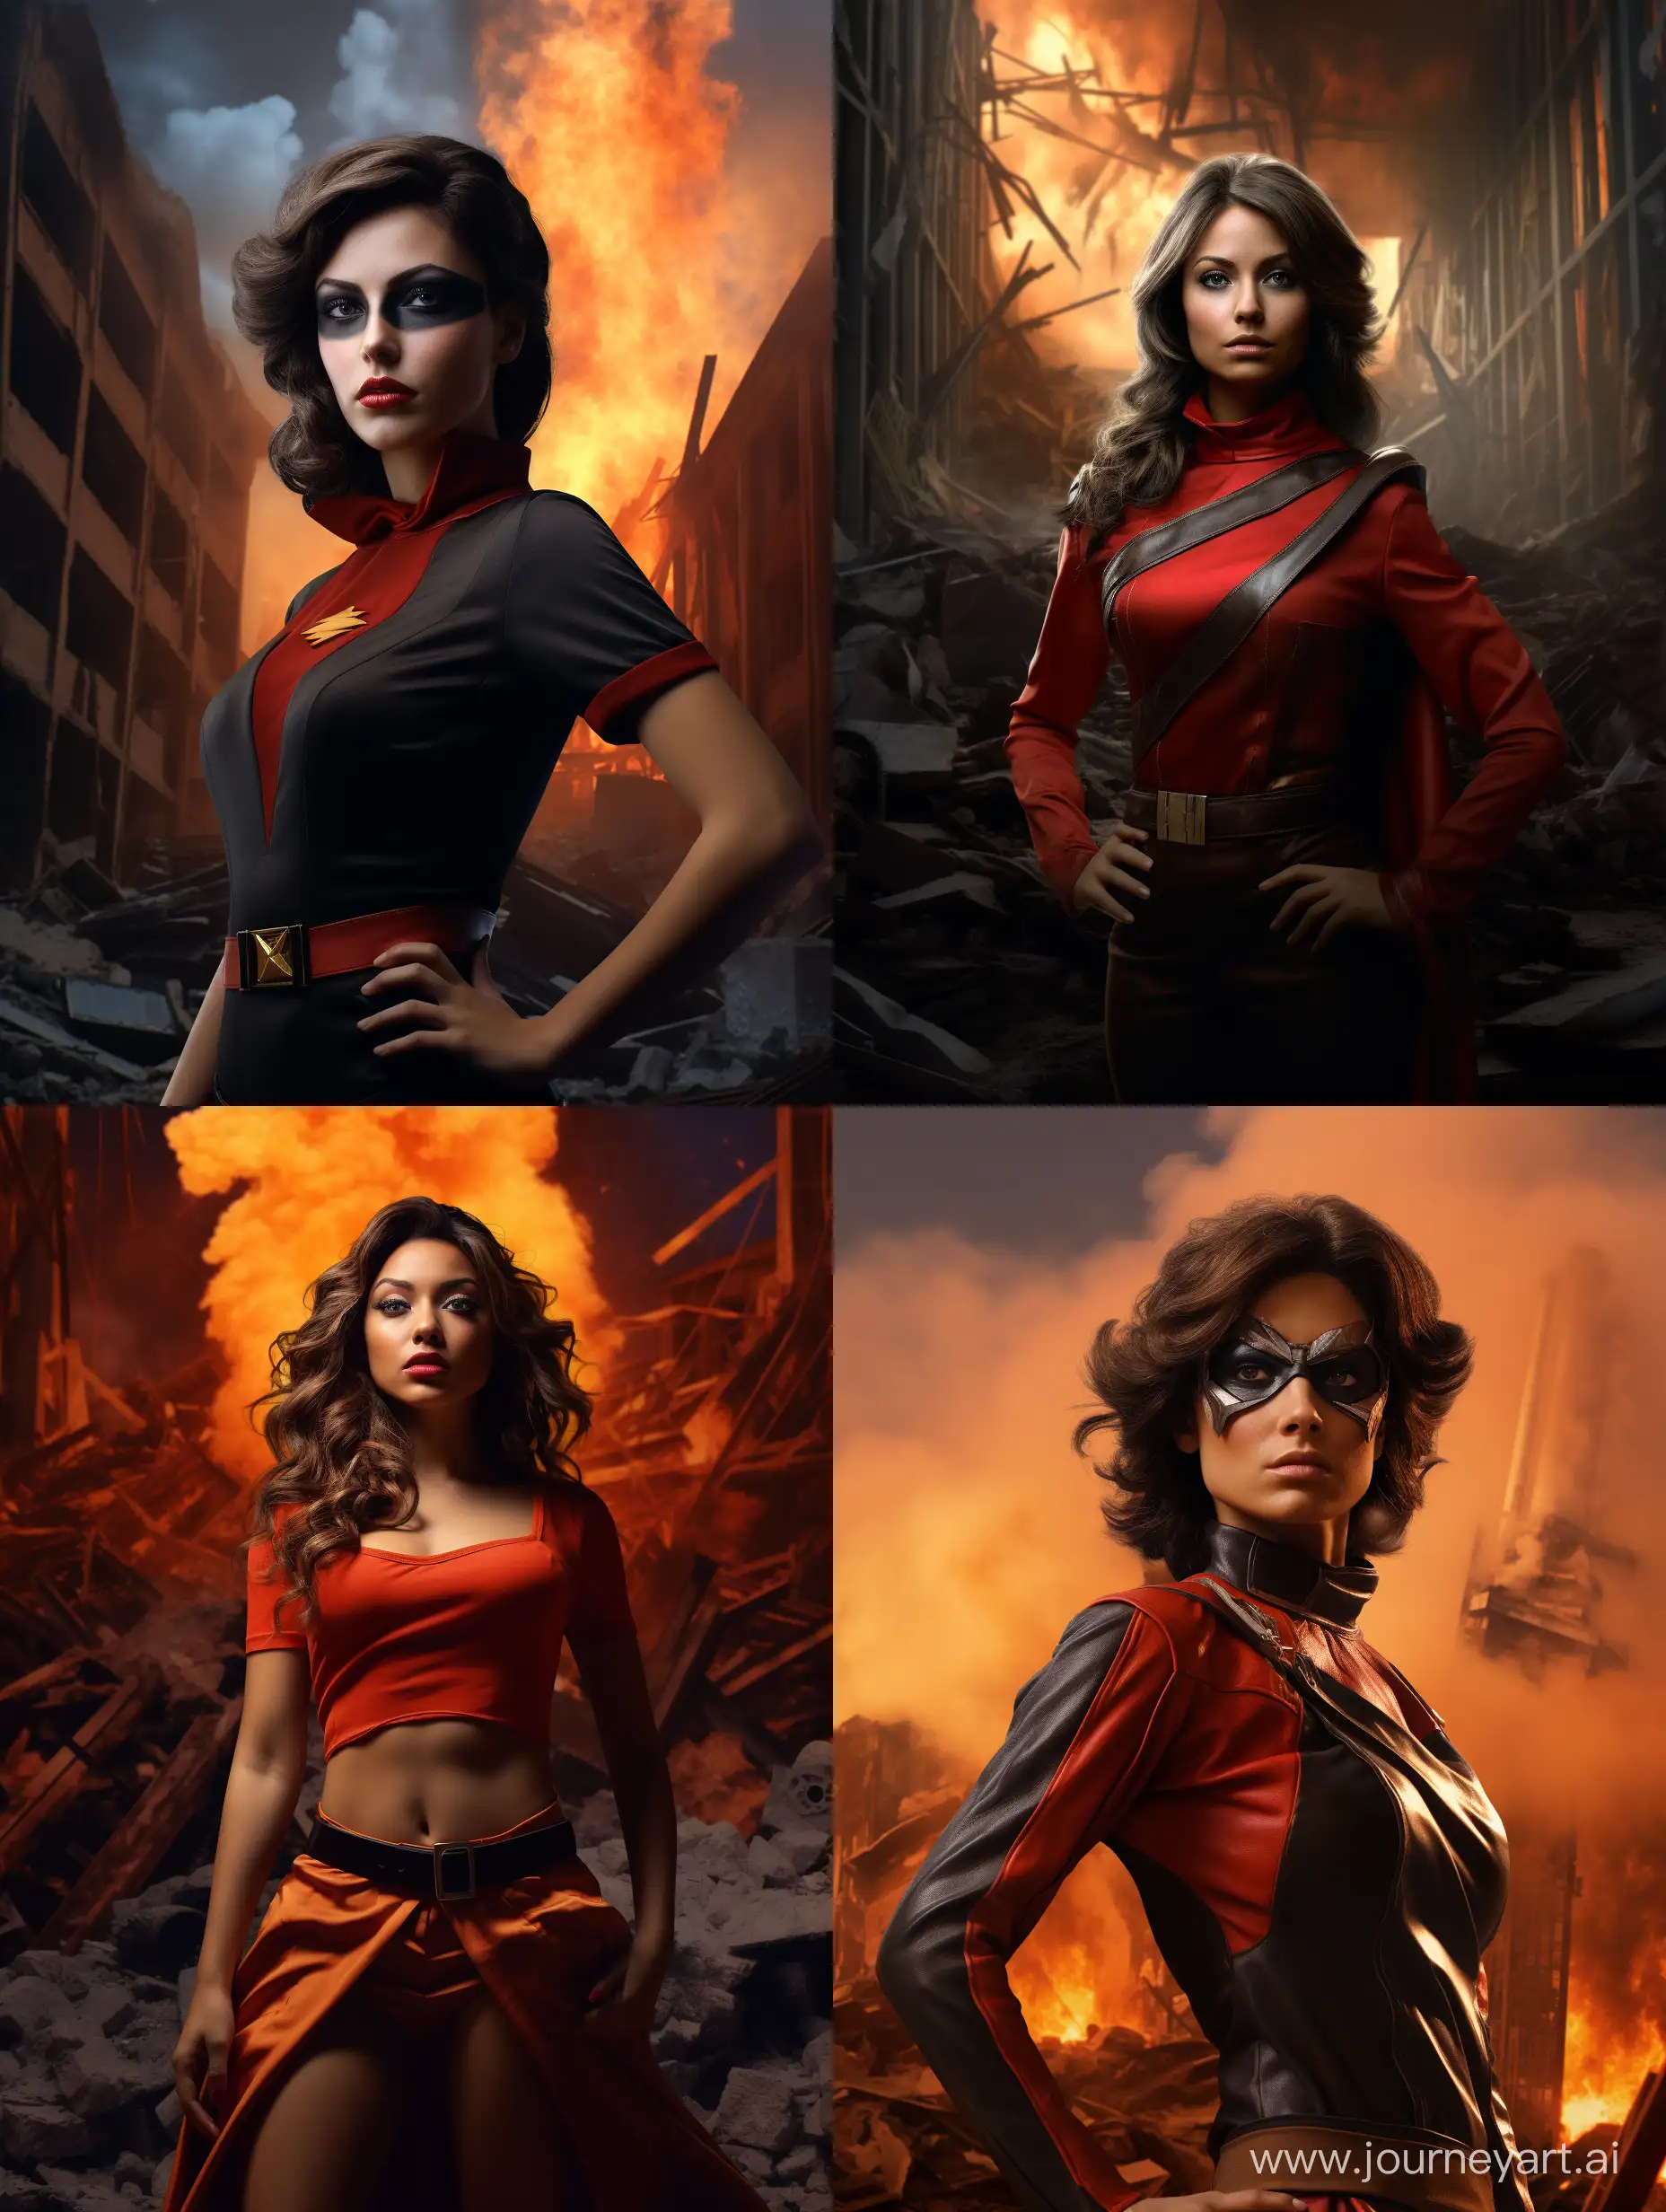 Determined-Workers-Rights-Superheroine-Rescues-Burning-Pajareria